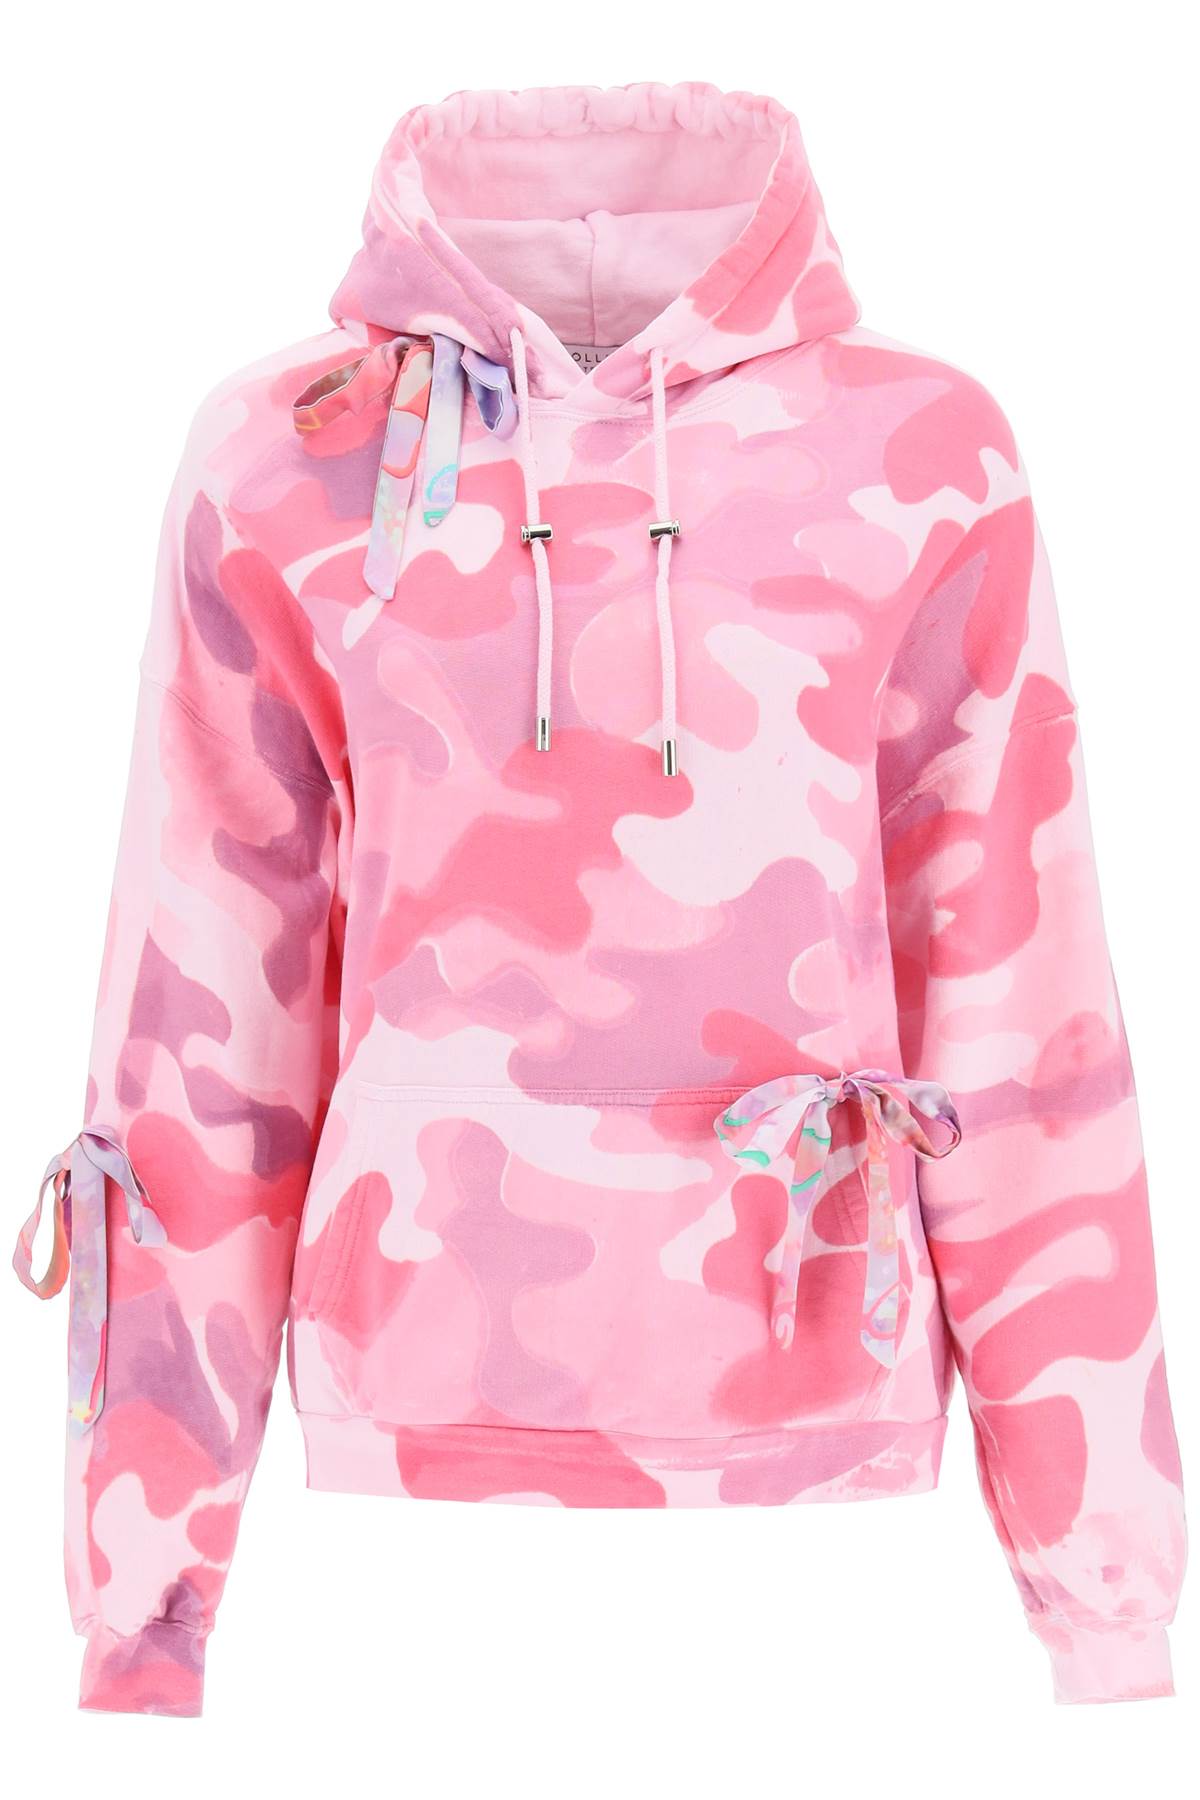 Collina Strada Tie-dye Hoodie With Bows